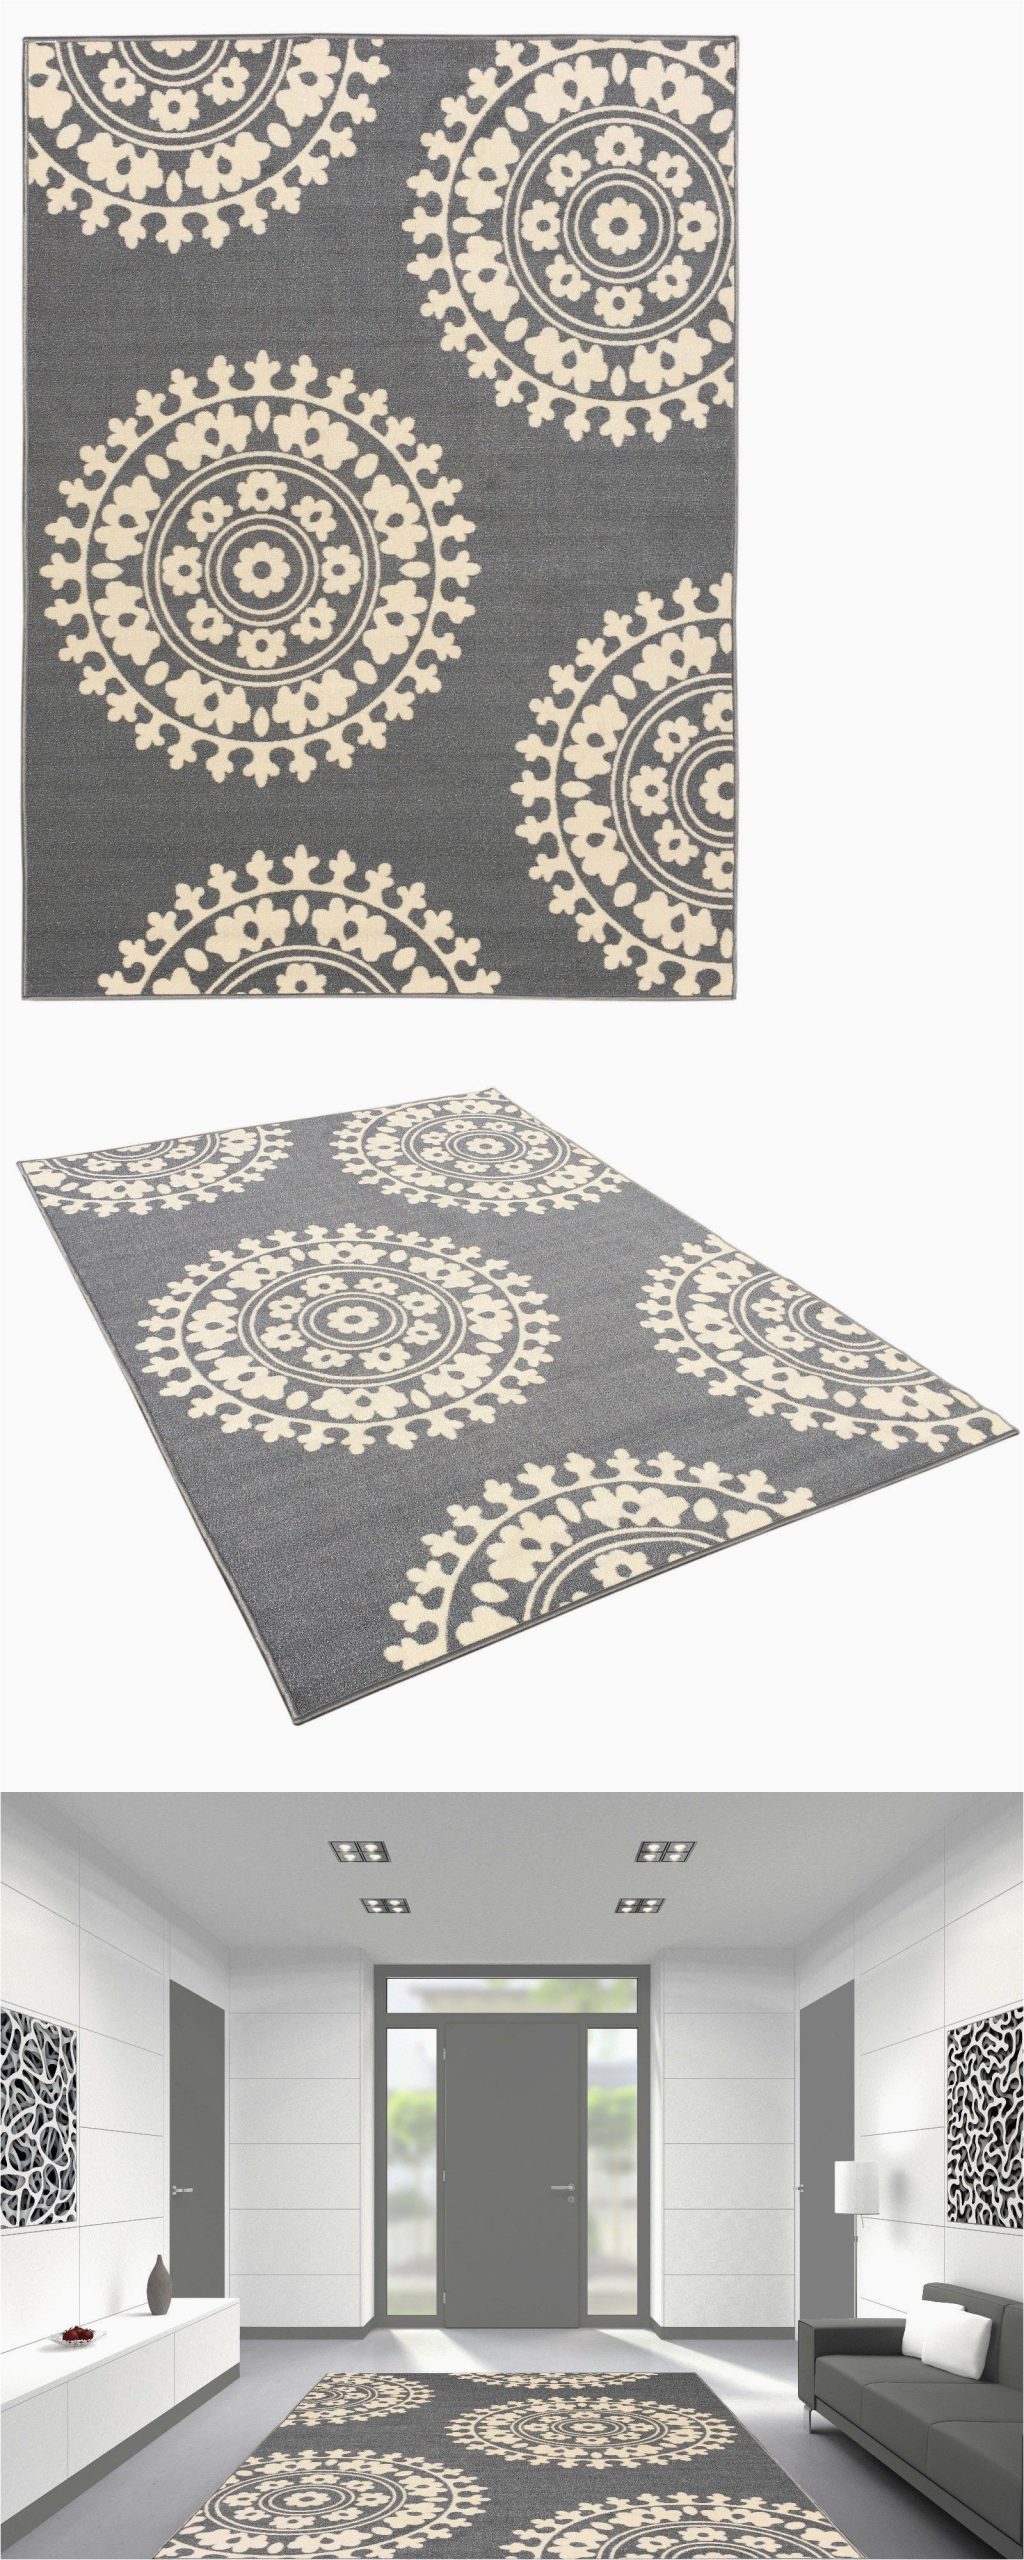 Area Rugs without Rubber Backing Details About Rubber Backed Non Skid Non Slip Gray Ivory